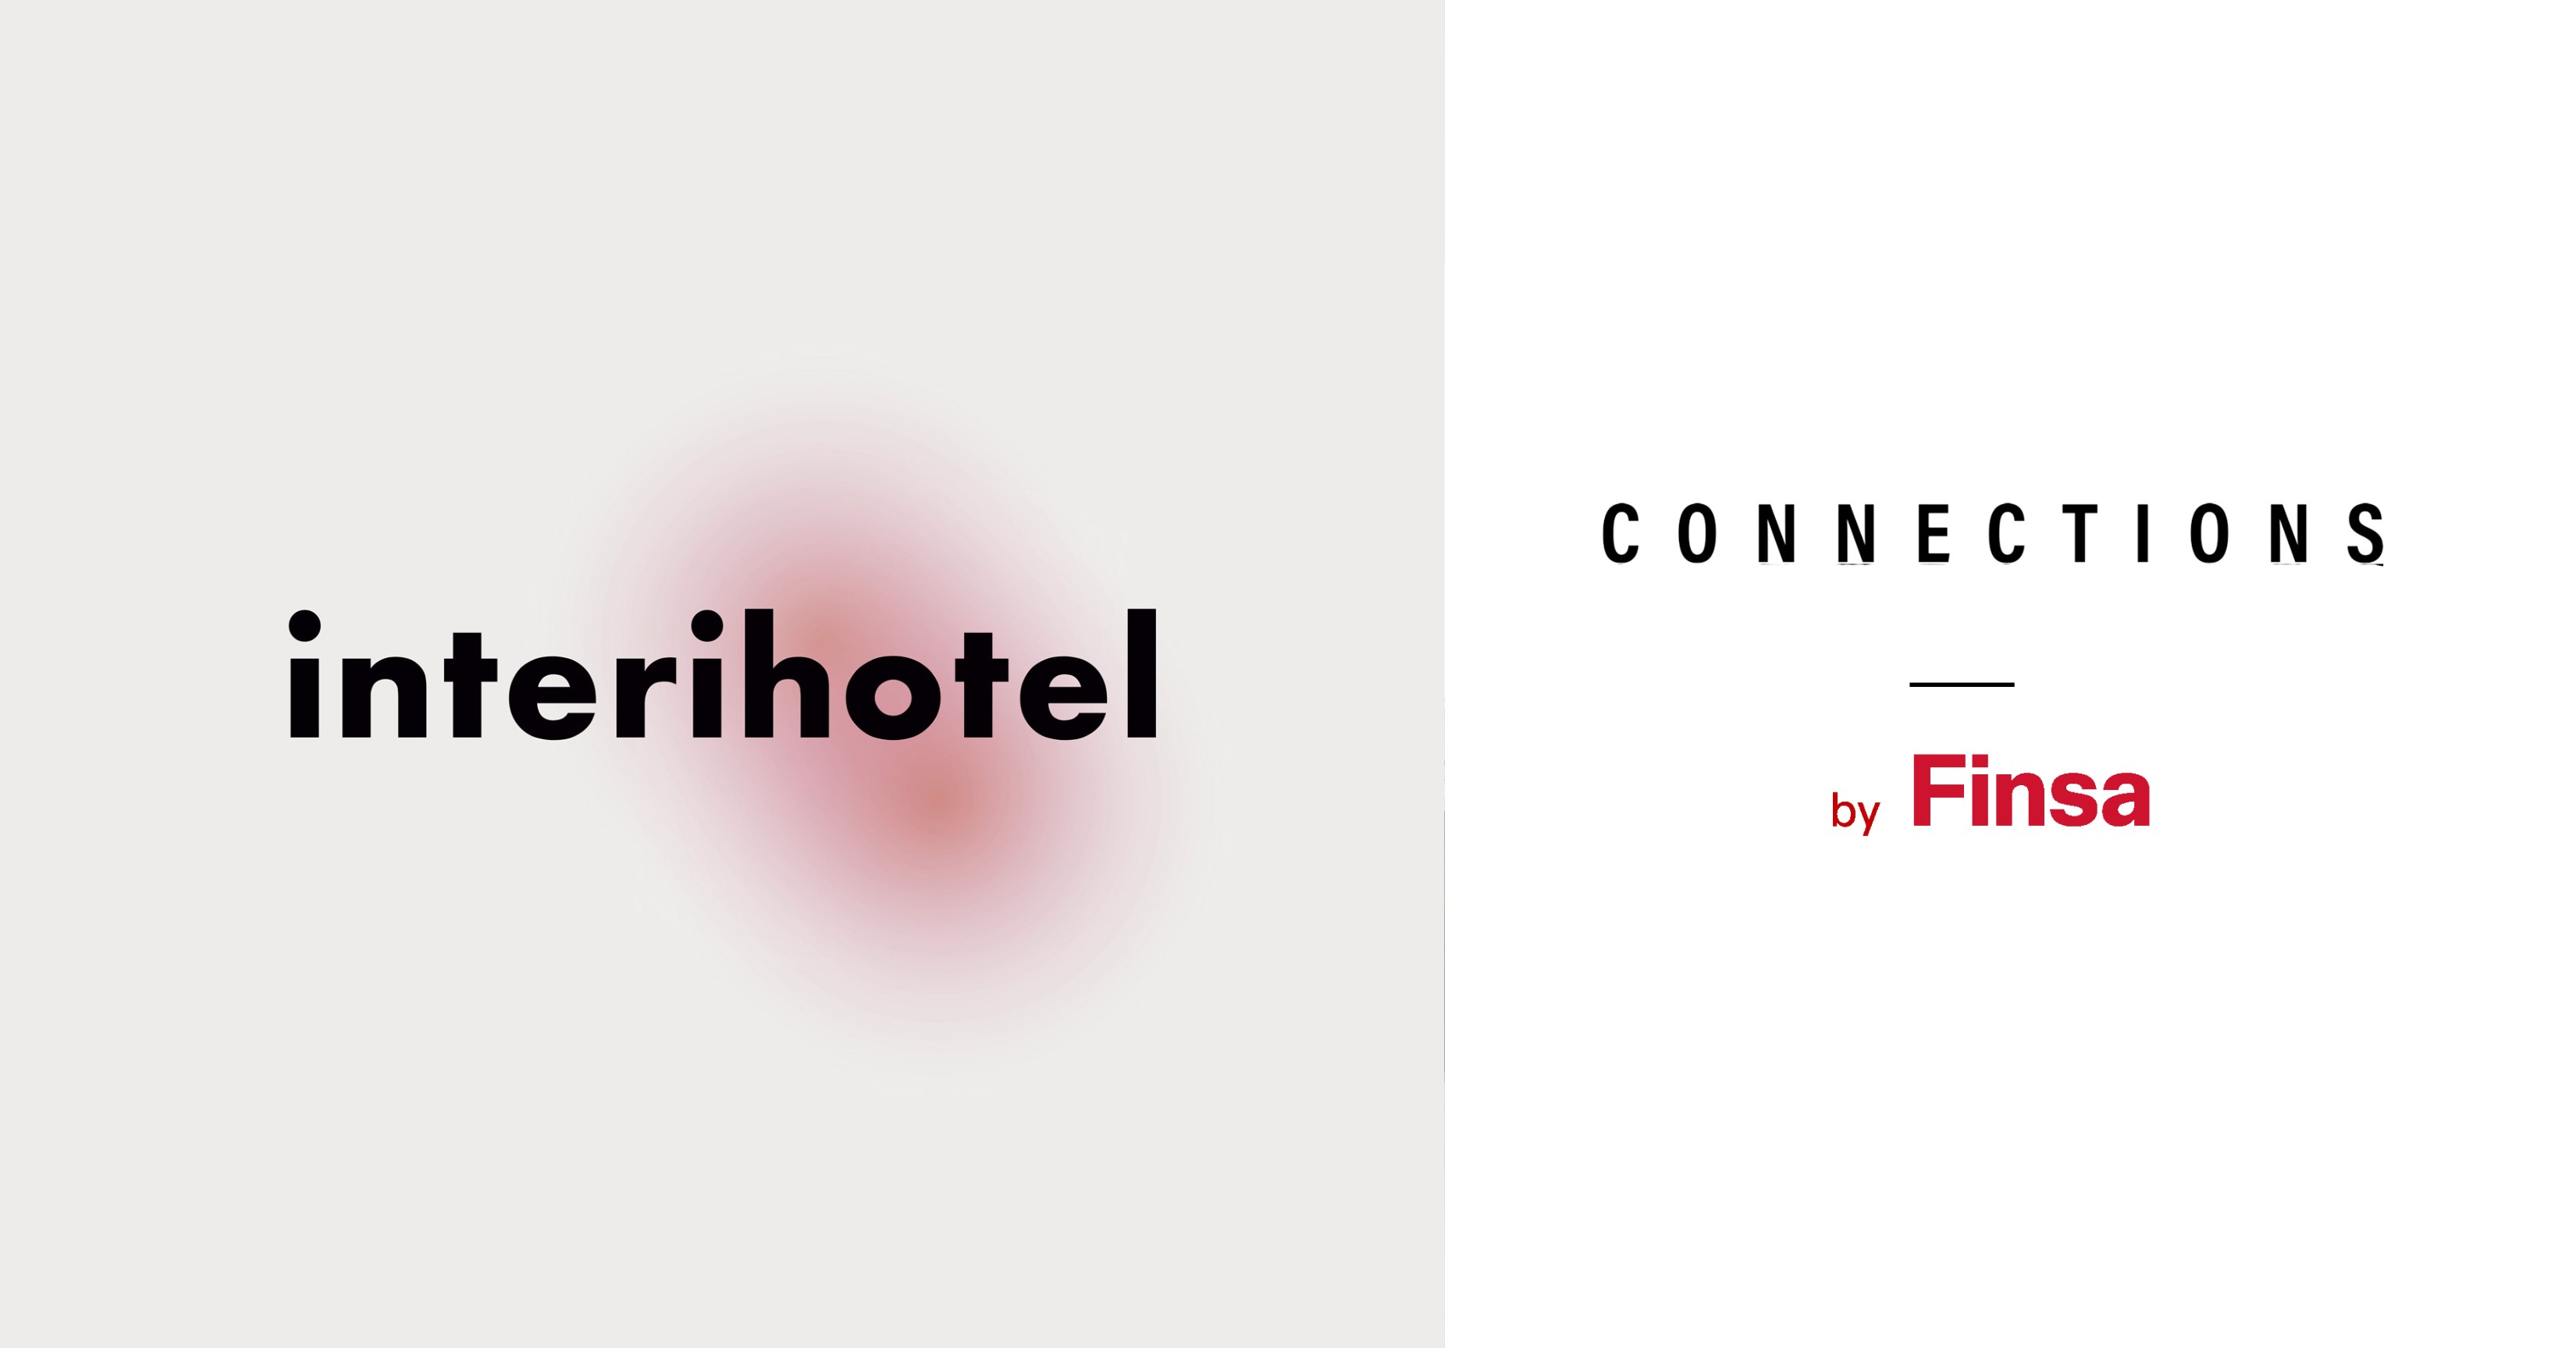 Interihotel 2023: much more than interior design for hotel rooms